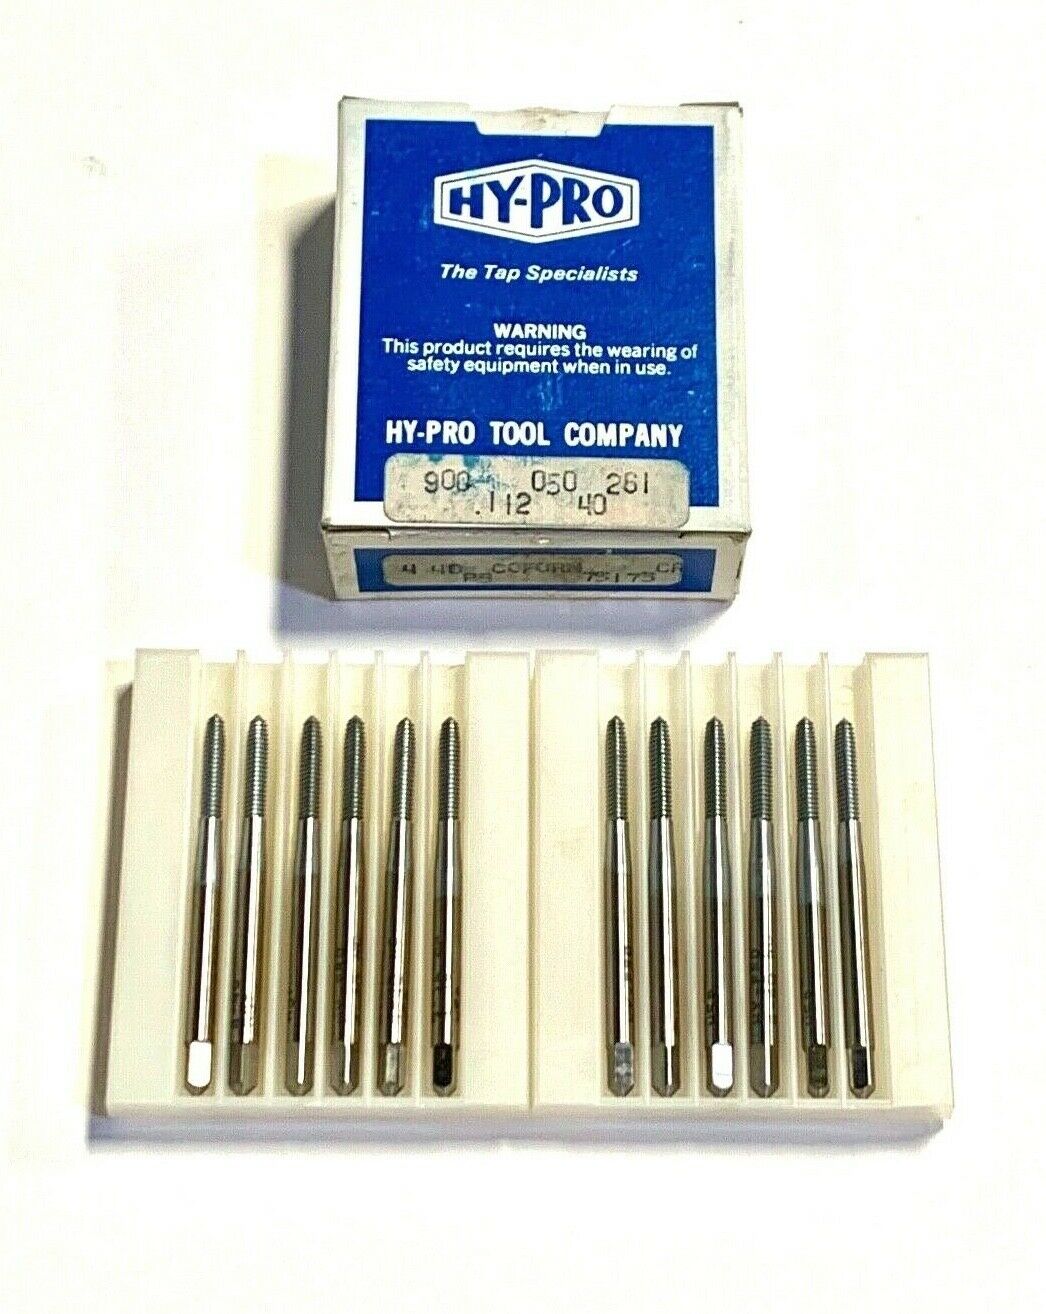 Hy-pro 4-40 Thread Forming Tap Hss Fluteless Taps Chip Removal 12 Pack Usa Made